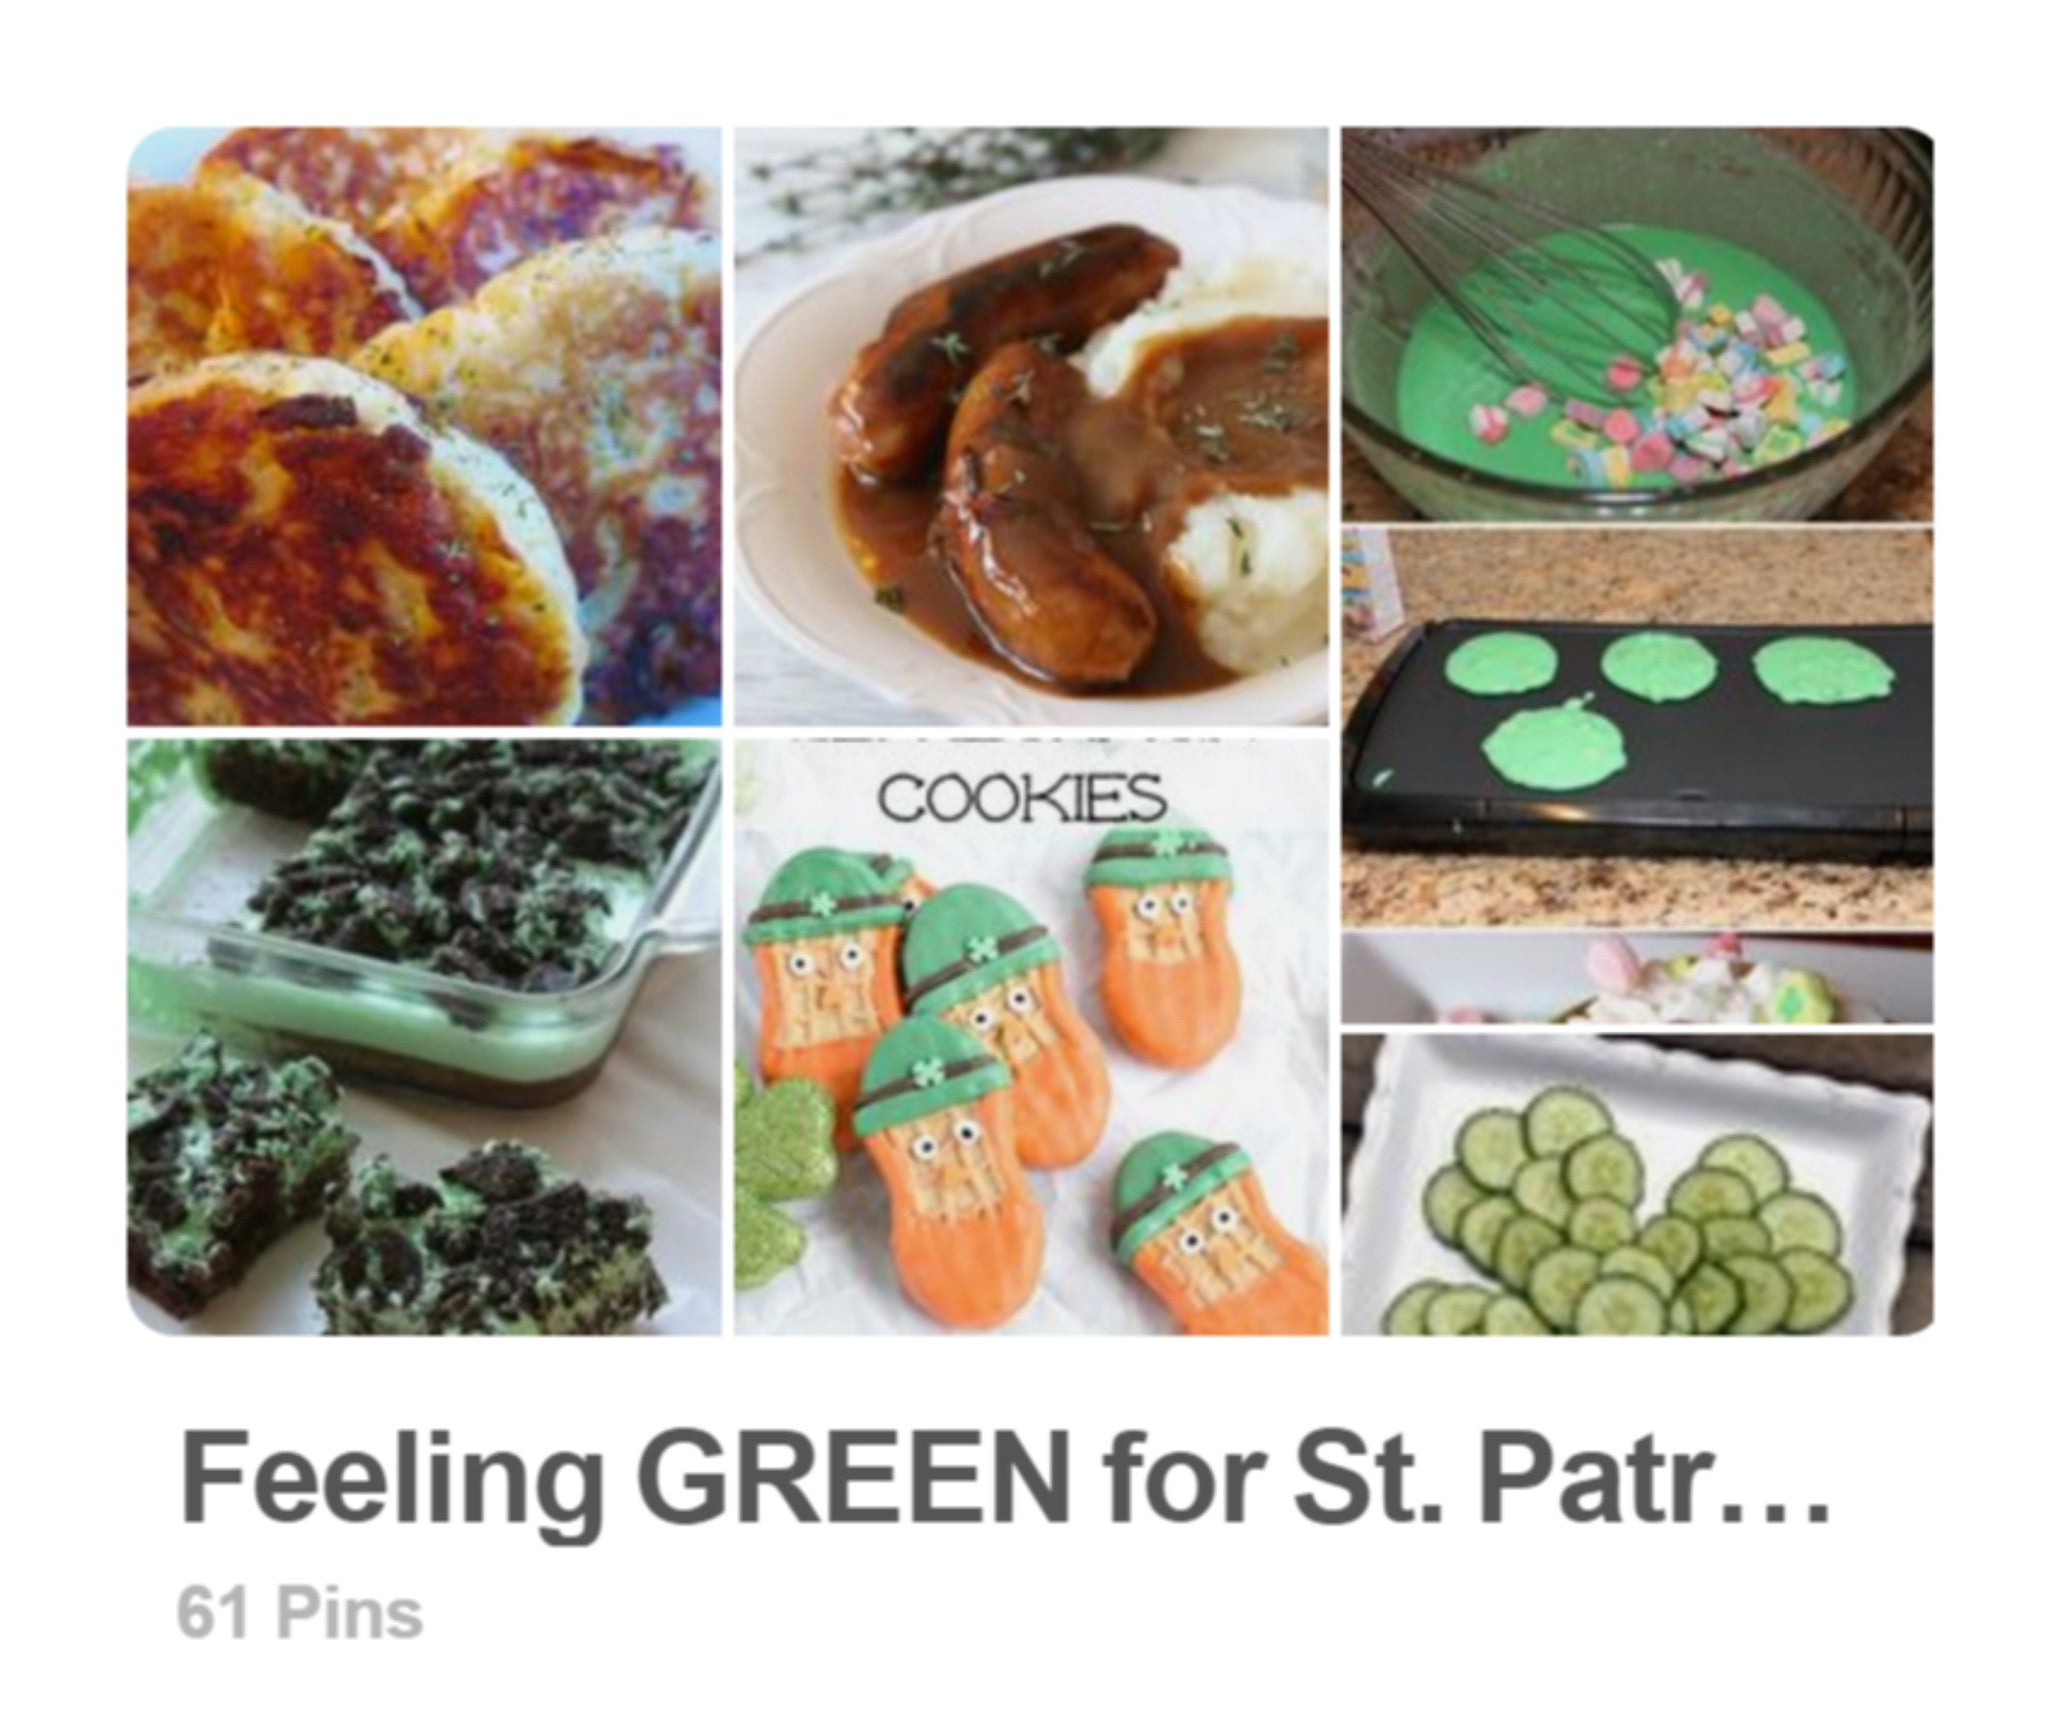 Break out the green . . . it's almost St Patrick's Day!!